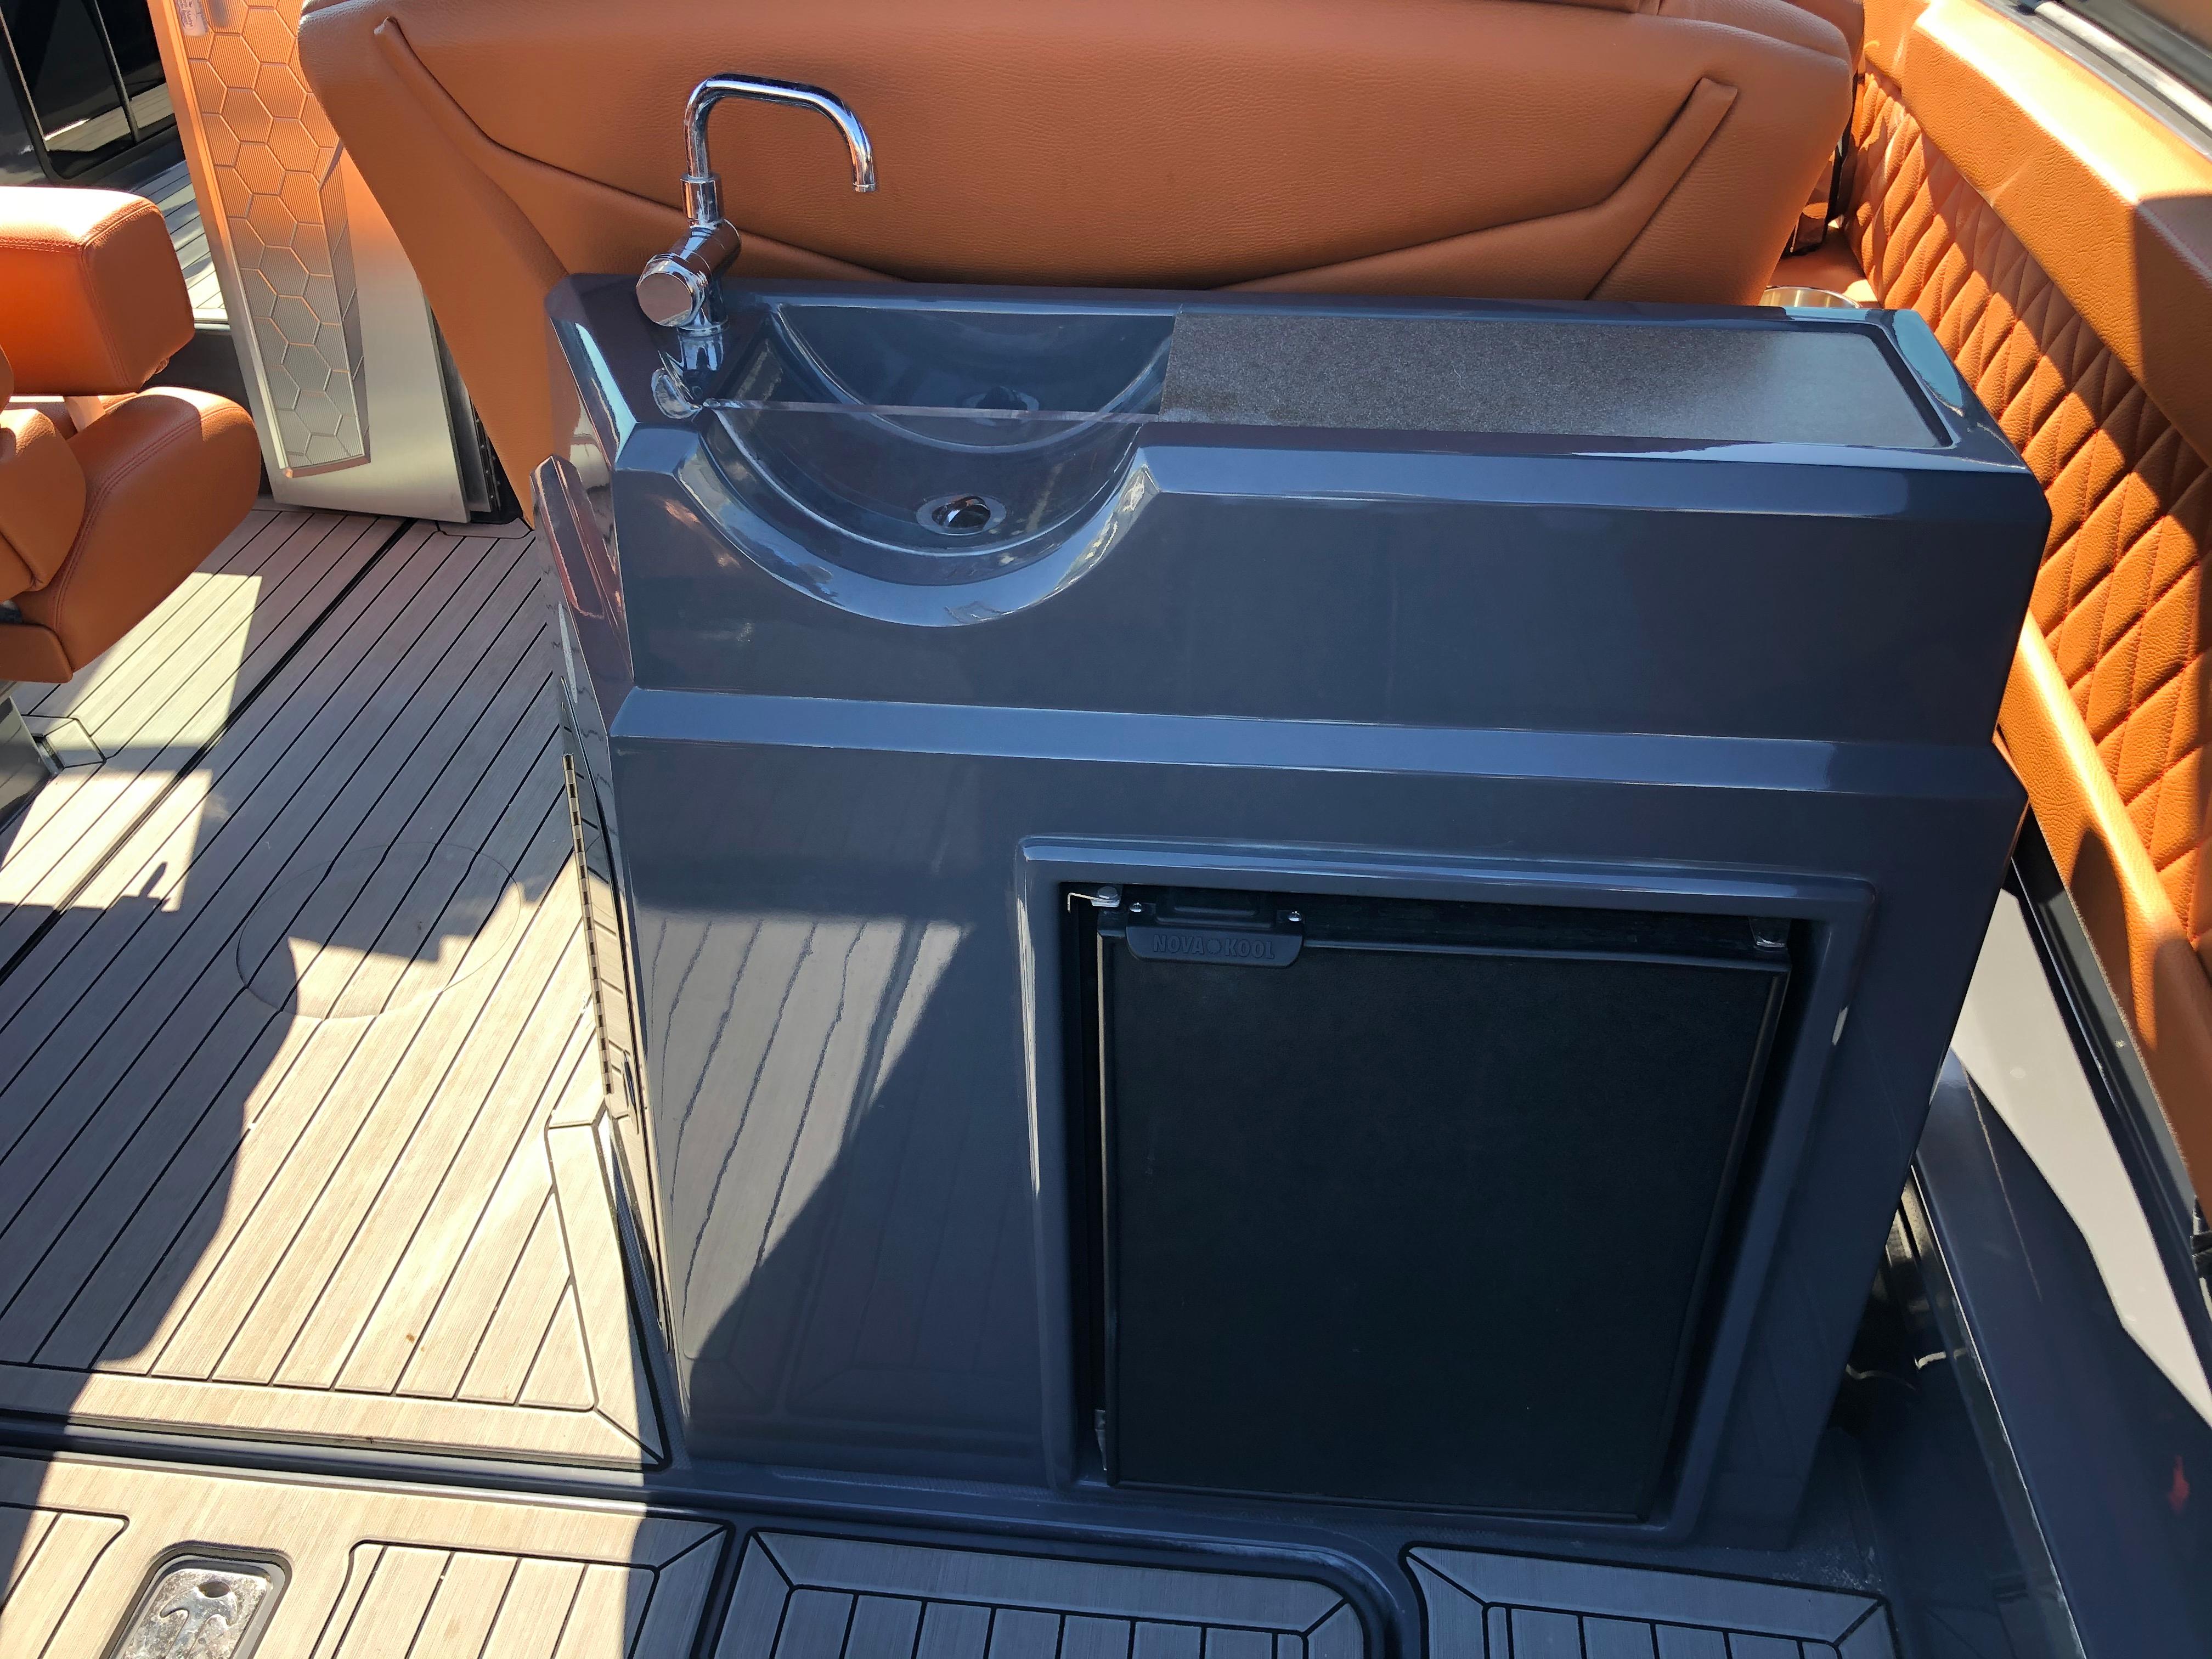 2017 Cruisers 338 South Beach - Happy Ours - Refrigerator and Sink